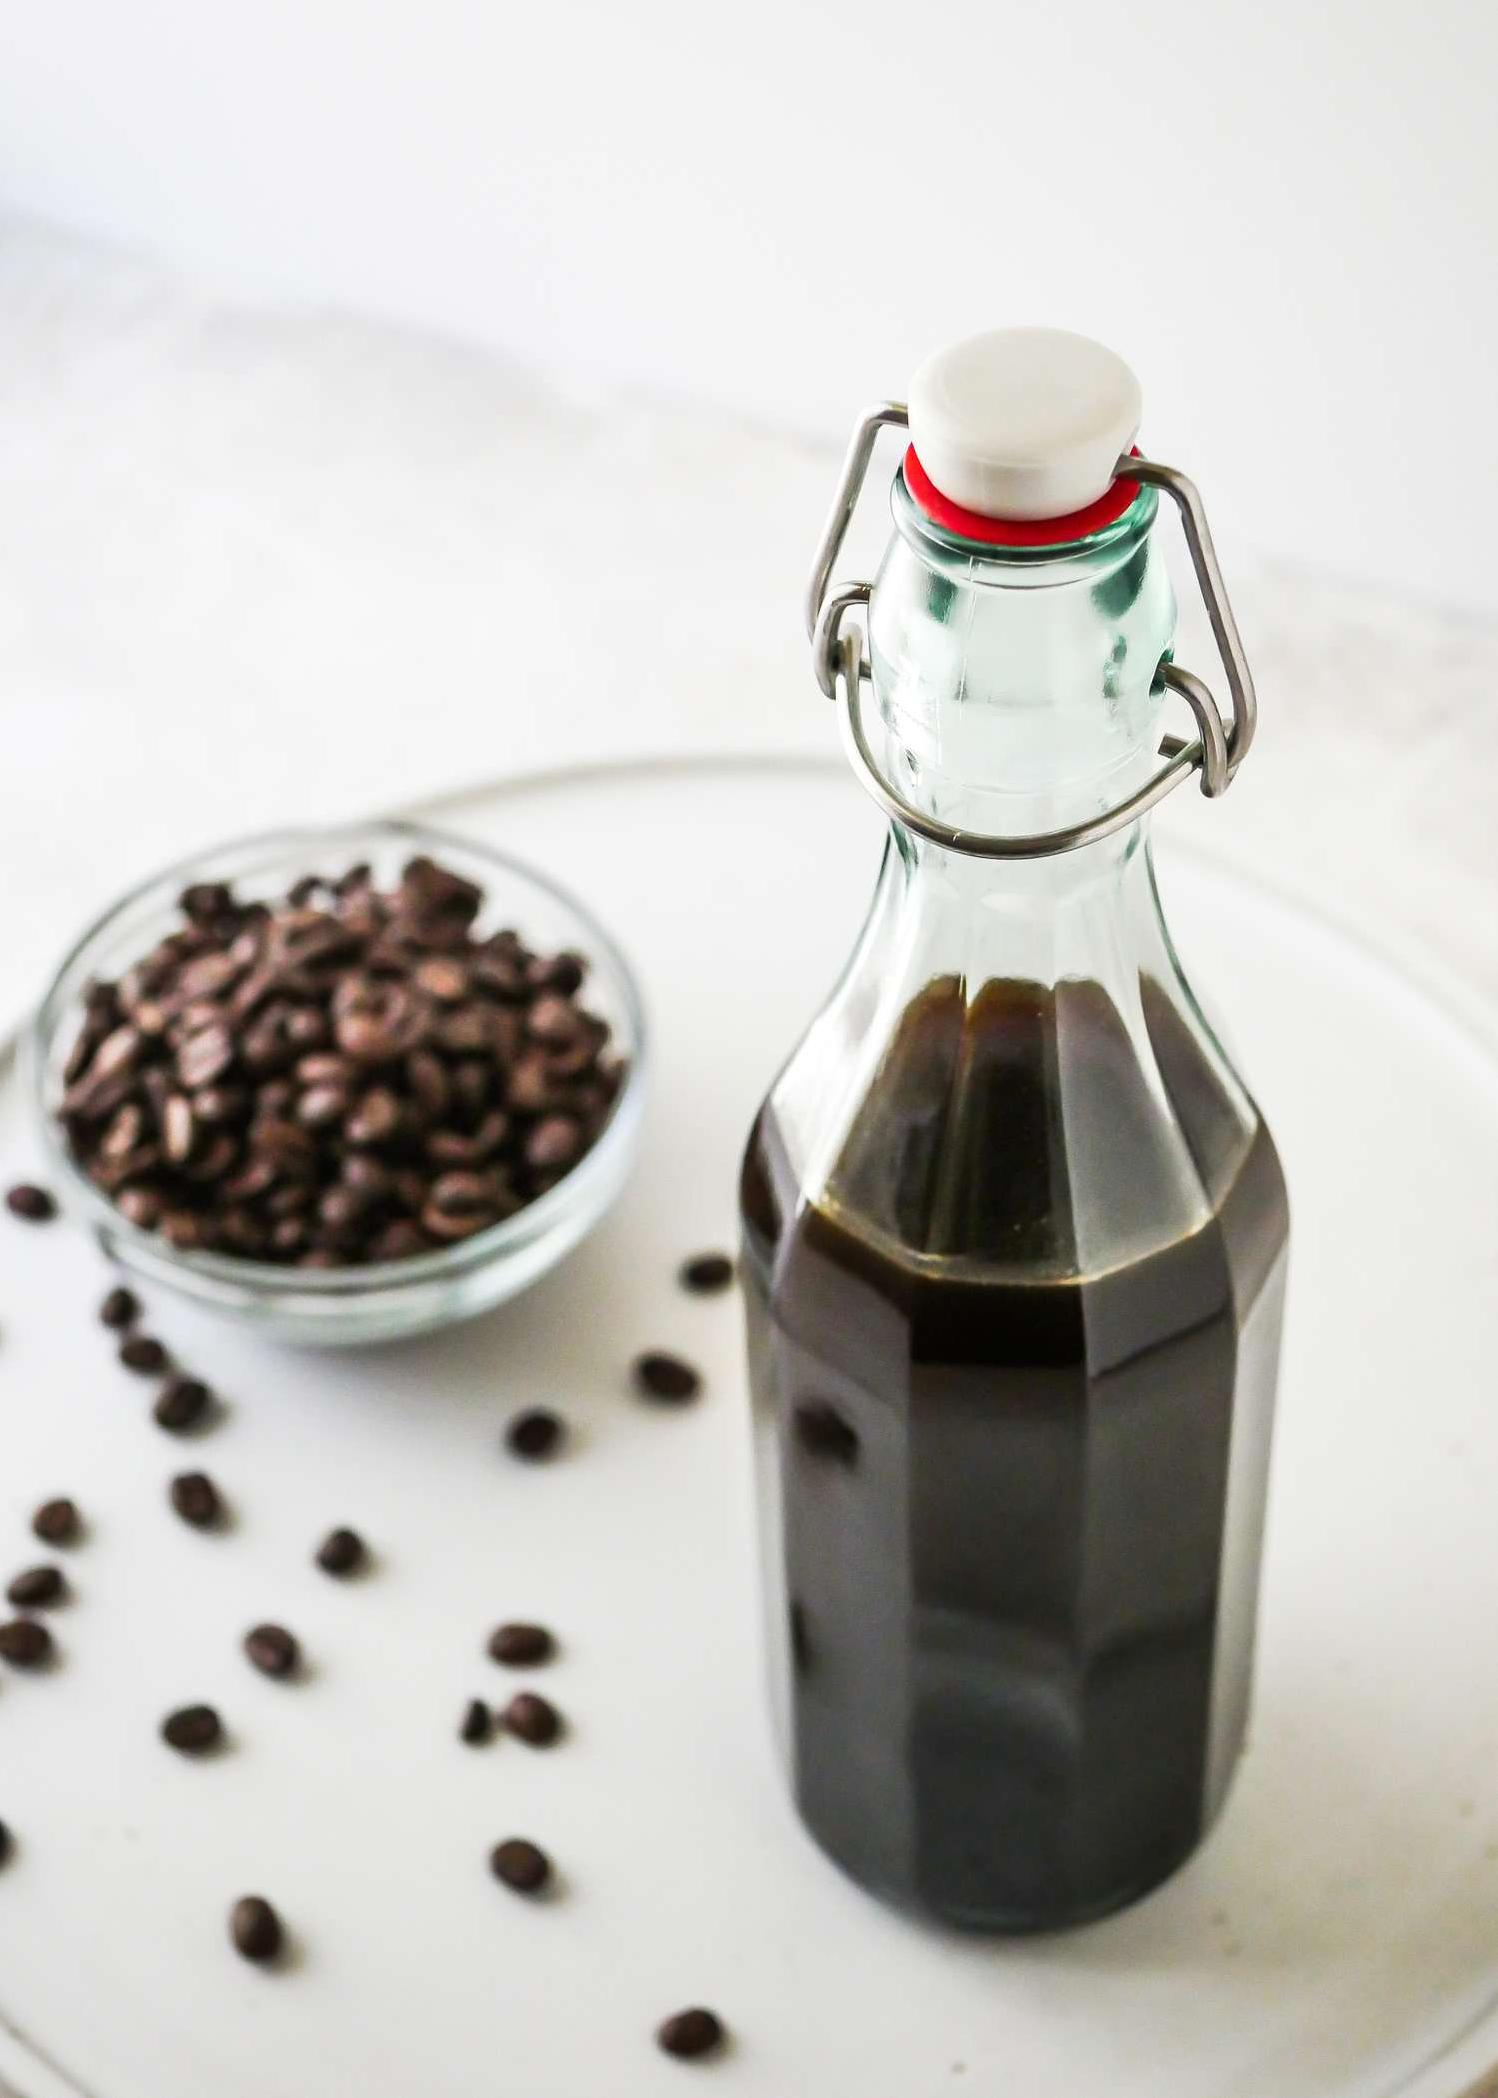  A bottle of homemade coffee liqueur: the perfect addition to your home bar!